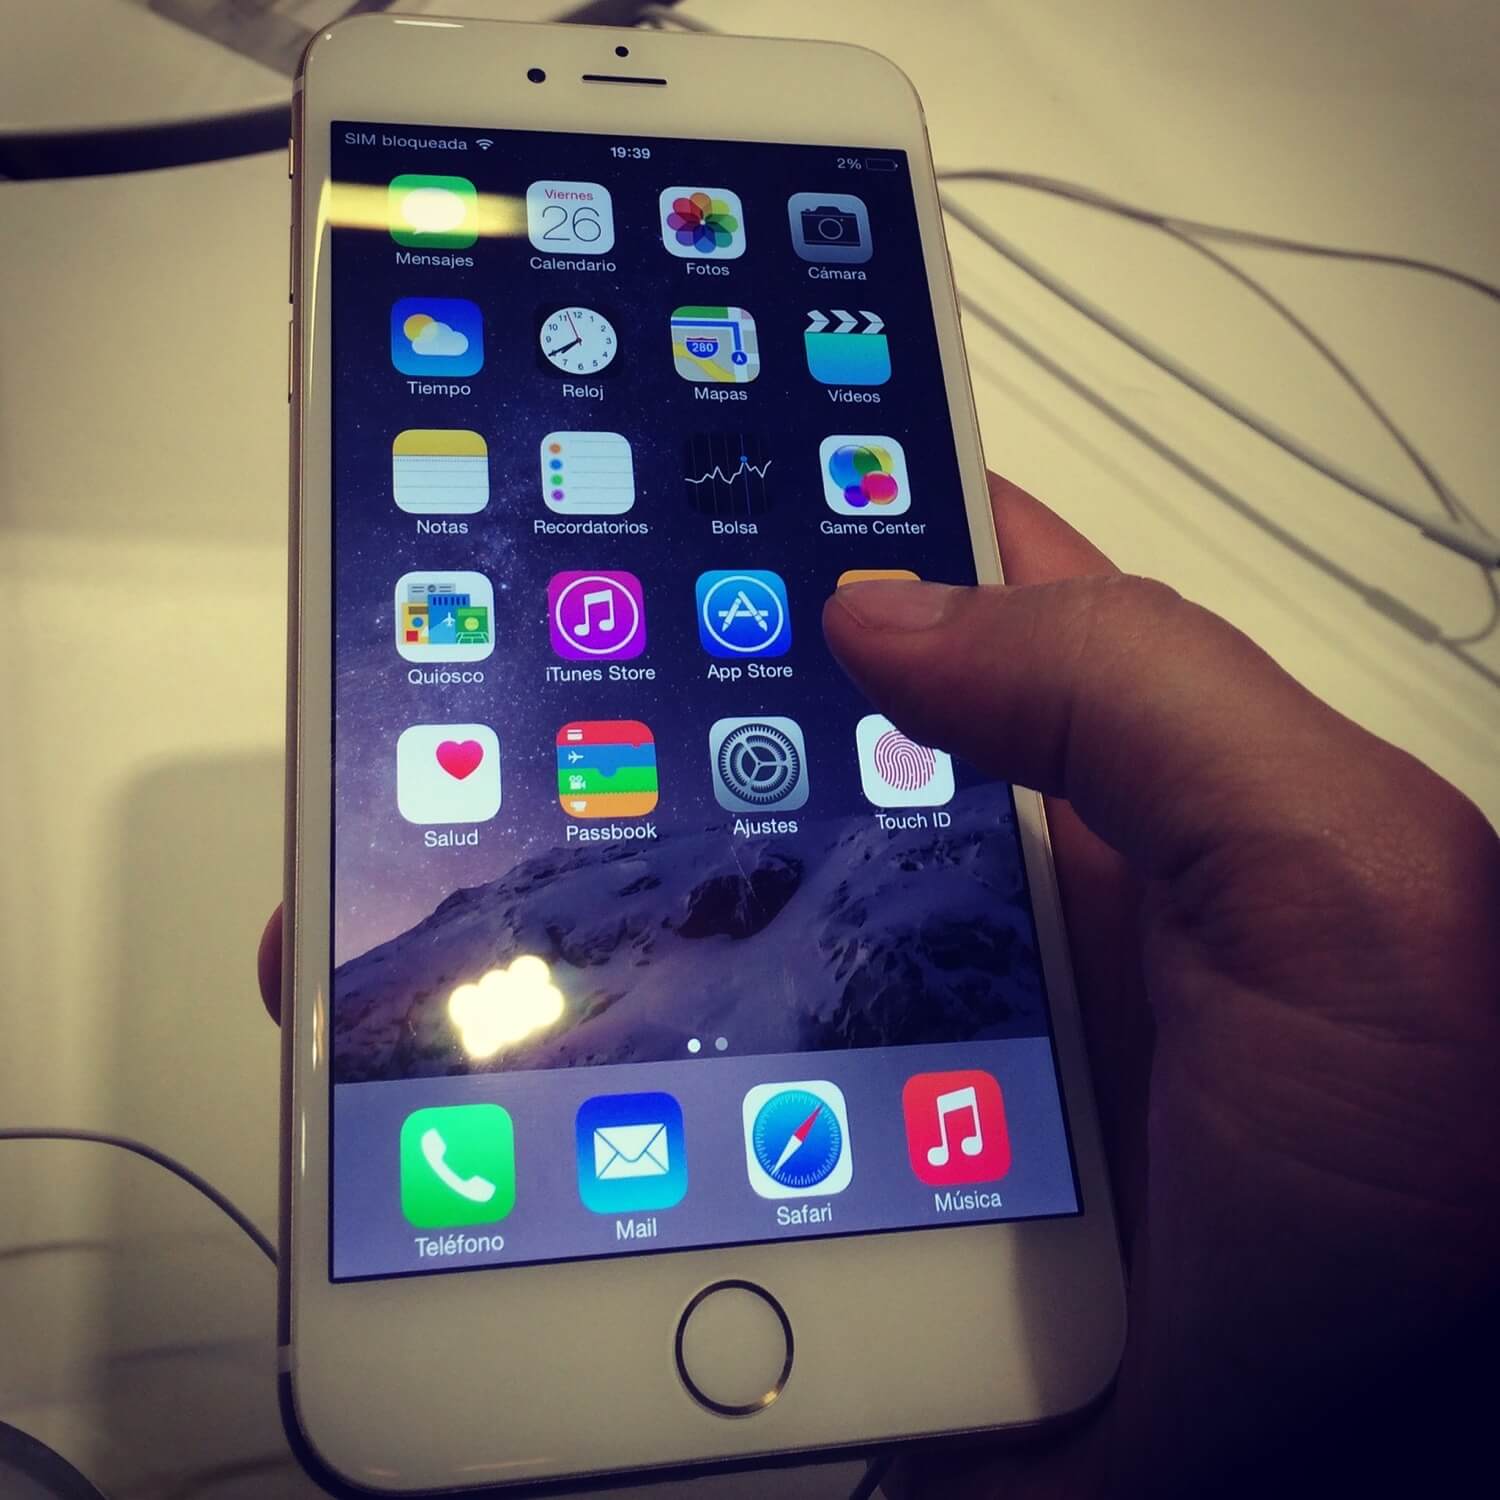 A sad story of the last one-handed phone ever - my iPhone 5s - my habits will need to change